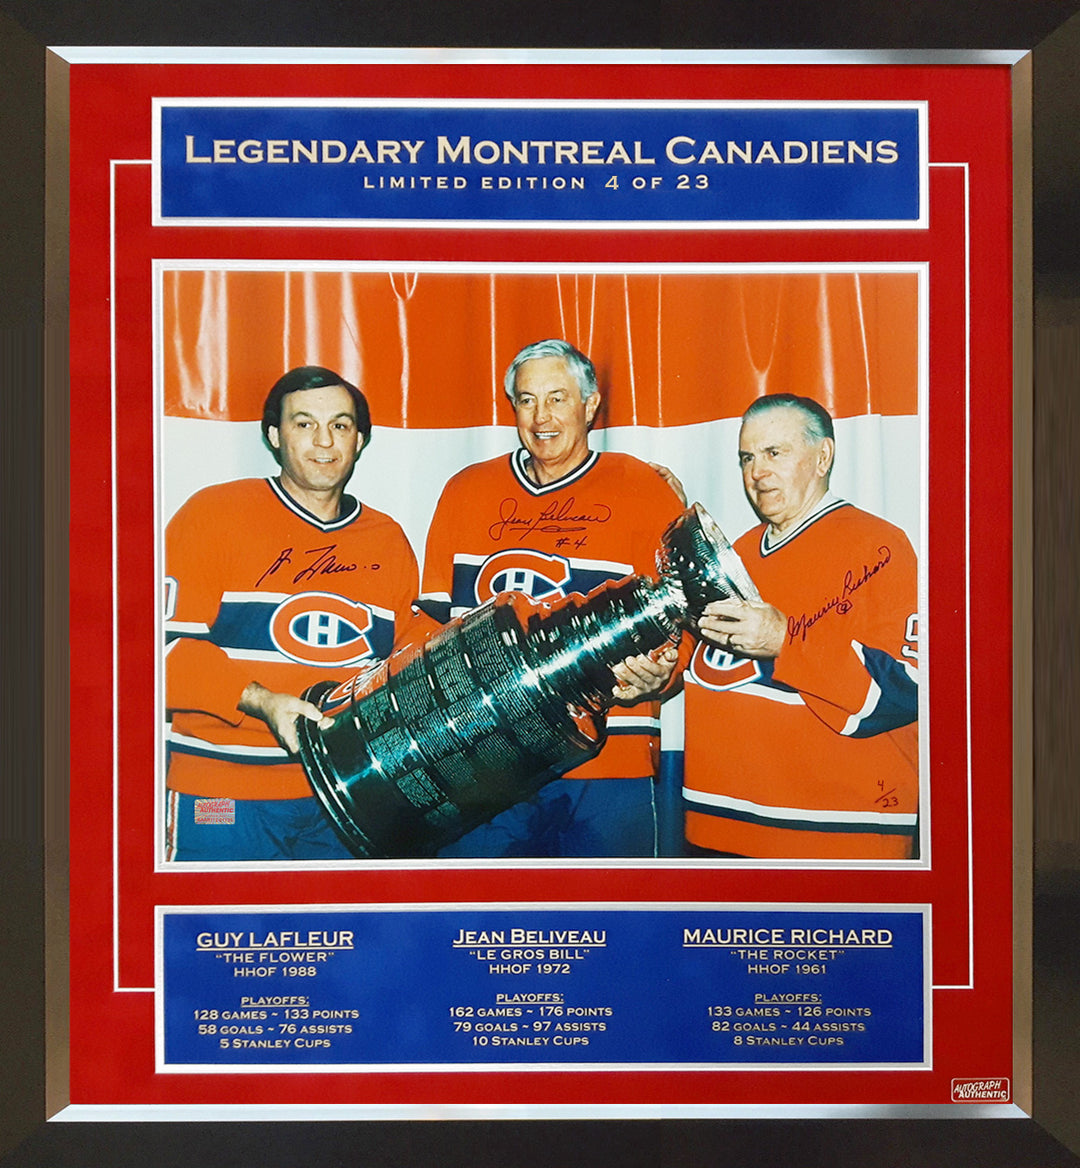 Maurice Richard, Jean Beliveau, Guy Lafleur Signed #4 Of 23 16X20 Photograph, Montreal Canadiens, NHL, Hockey, Autographed, Signed, AAPCH31952